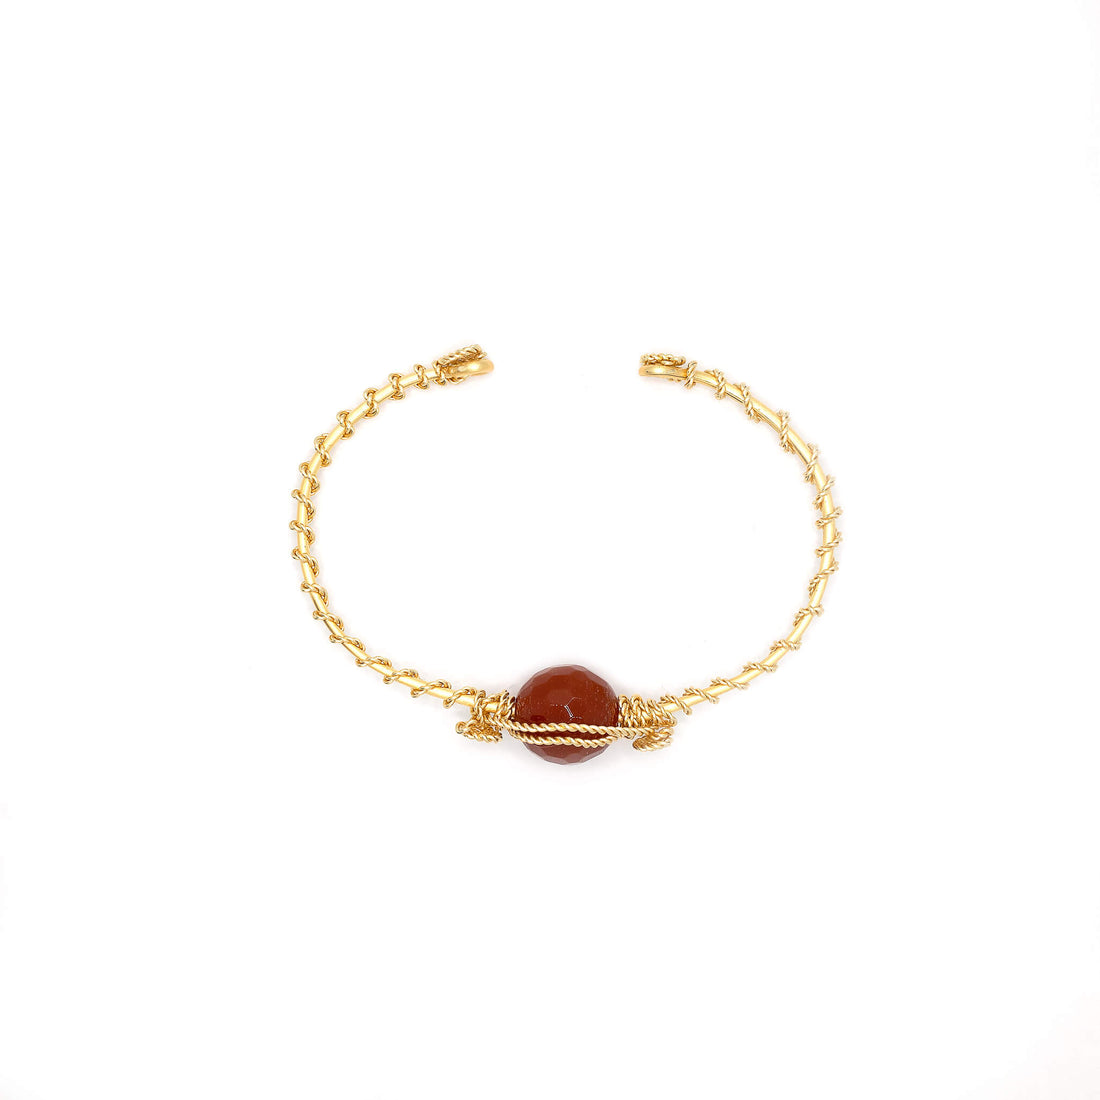 Enger Bracelet is one size fits all. Gold and Red bracelet. Handmade with Non-tarnish Gold plated wire and Round beads crystals. Wire wrapped bracelet. 